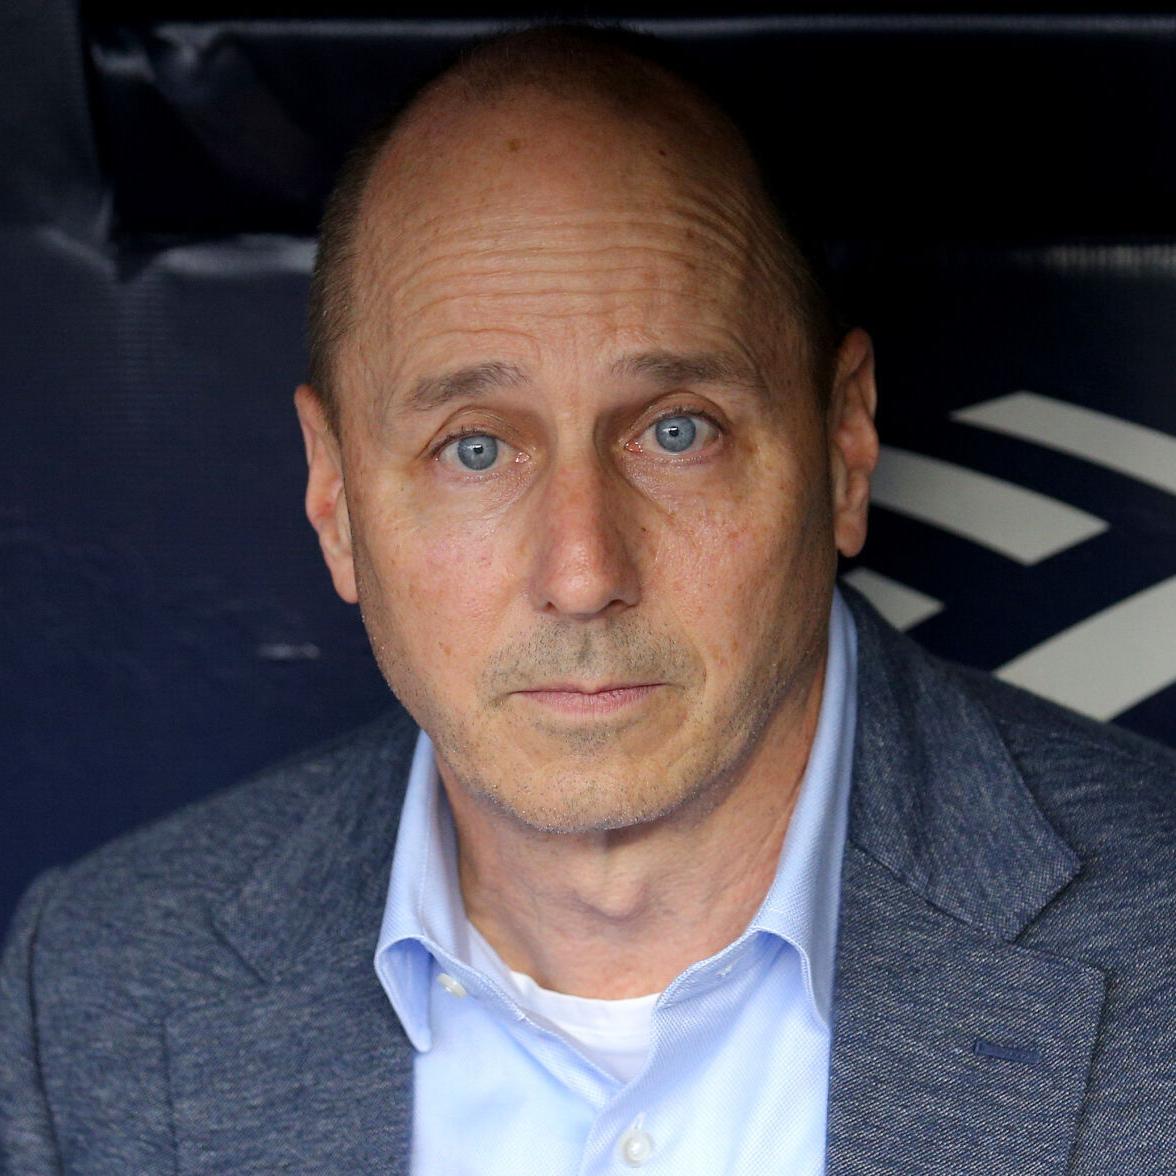 Should Brian Cashman and the Yankees trade Gleyber Torres?